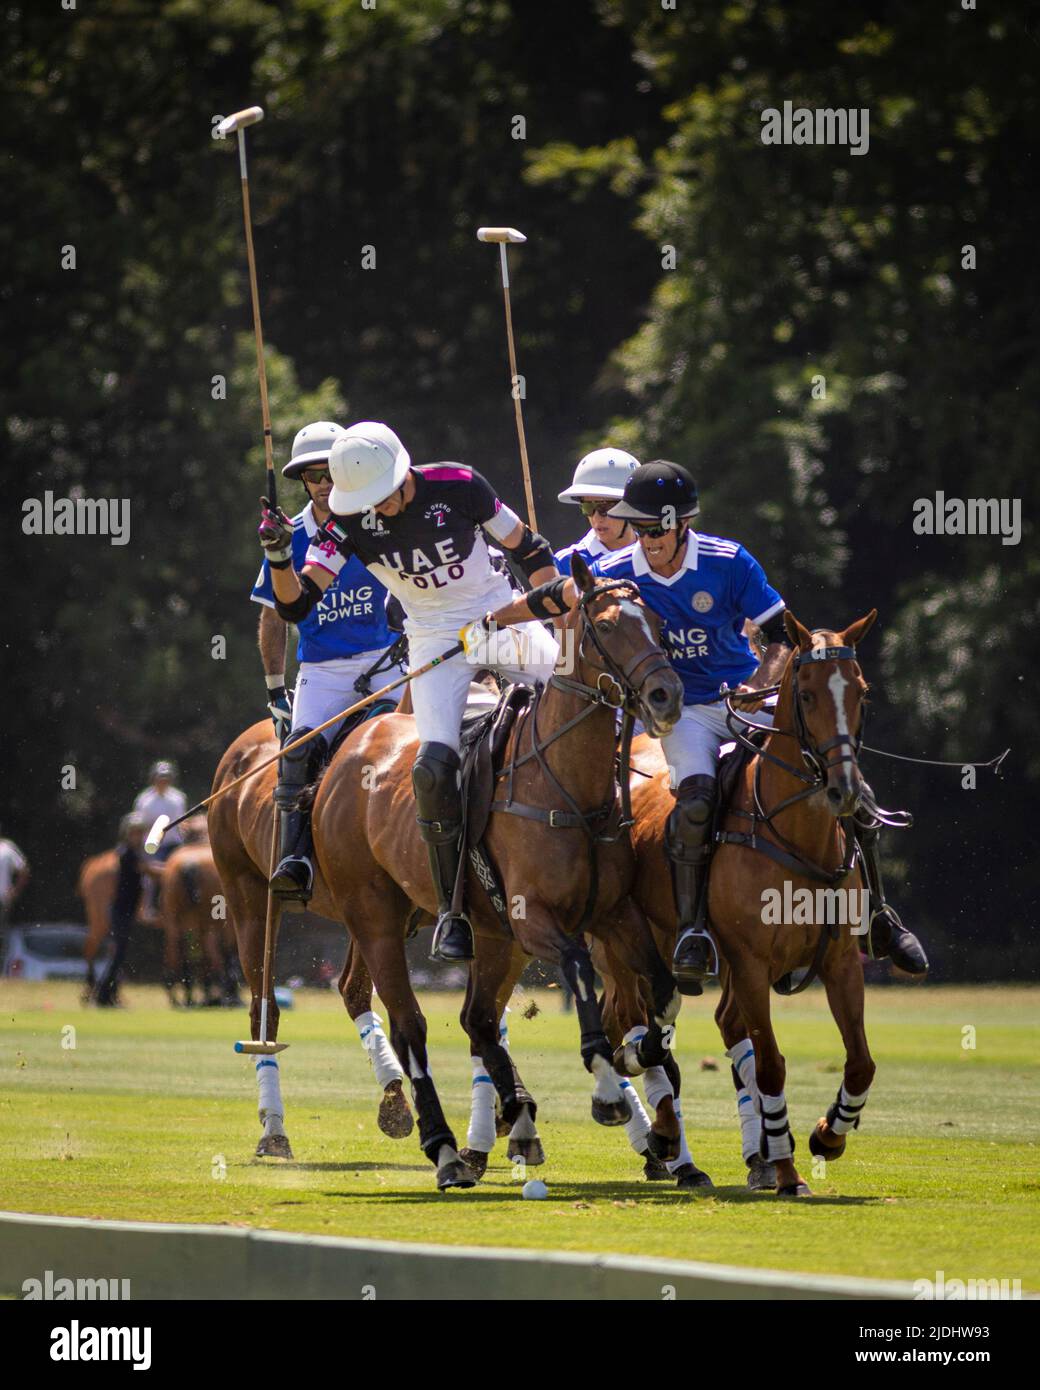 Tomas Beresford of UAE blocks James Harper of King Power (in blue) at Cowdray Park Polo Club in Midhurst, West Sussex during the opening match of The Stock Photo